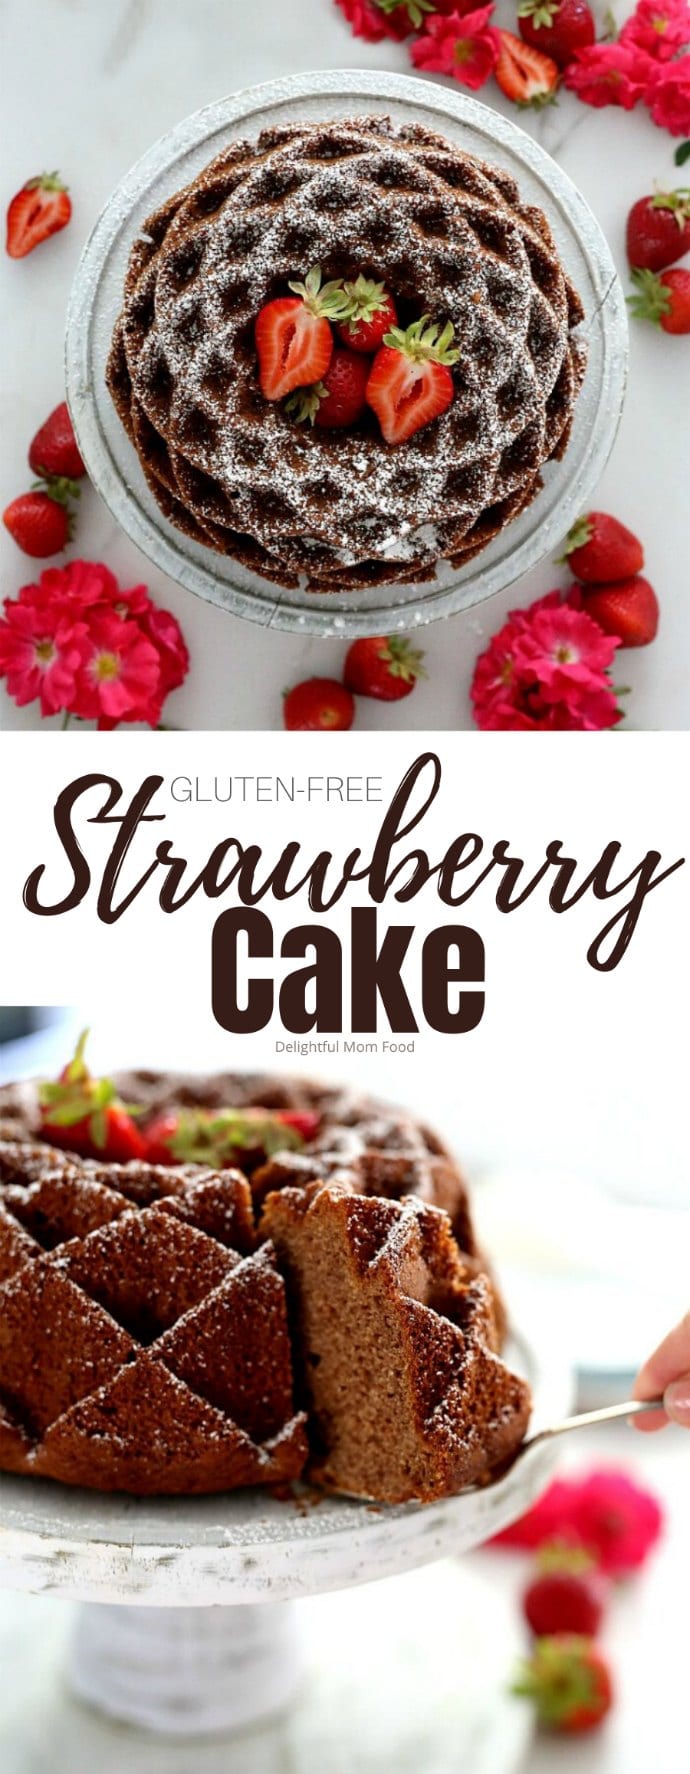 Gluten free strawberry cake made from scratch! This strawberry cake is made with blended fresh strawberries, coconut sugar, and gluten-free flours. Enjoy this tasty dessert for every celebration when strawberries are a must to use up! #glutenfreestrawberrycake #recipe #glutenfree #dairyfree #cakerecipe #strawberrycake #strawberries #strawberry #cake #wholesome #natural #redwhiteblue #redrecipes #dessert #treats #healthy | Recipe at Delightful Mom Food